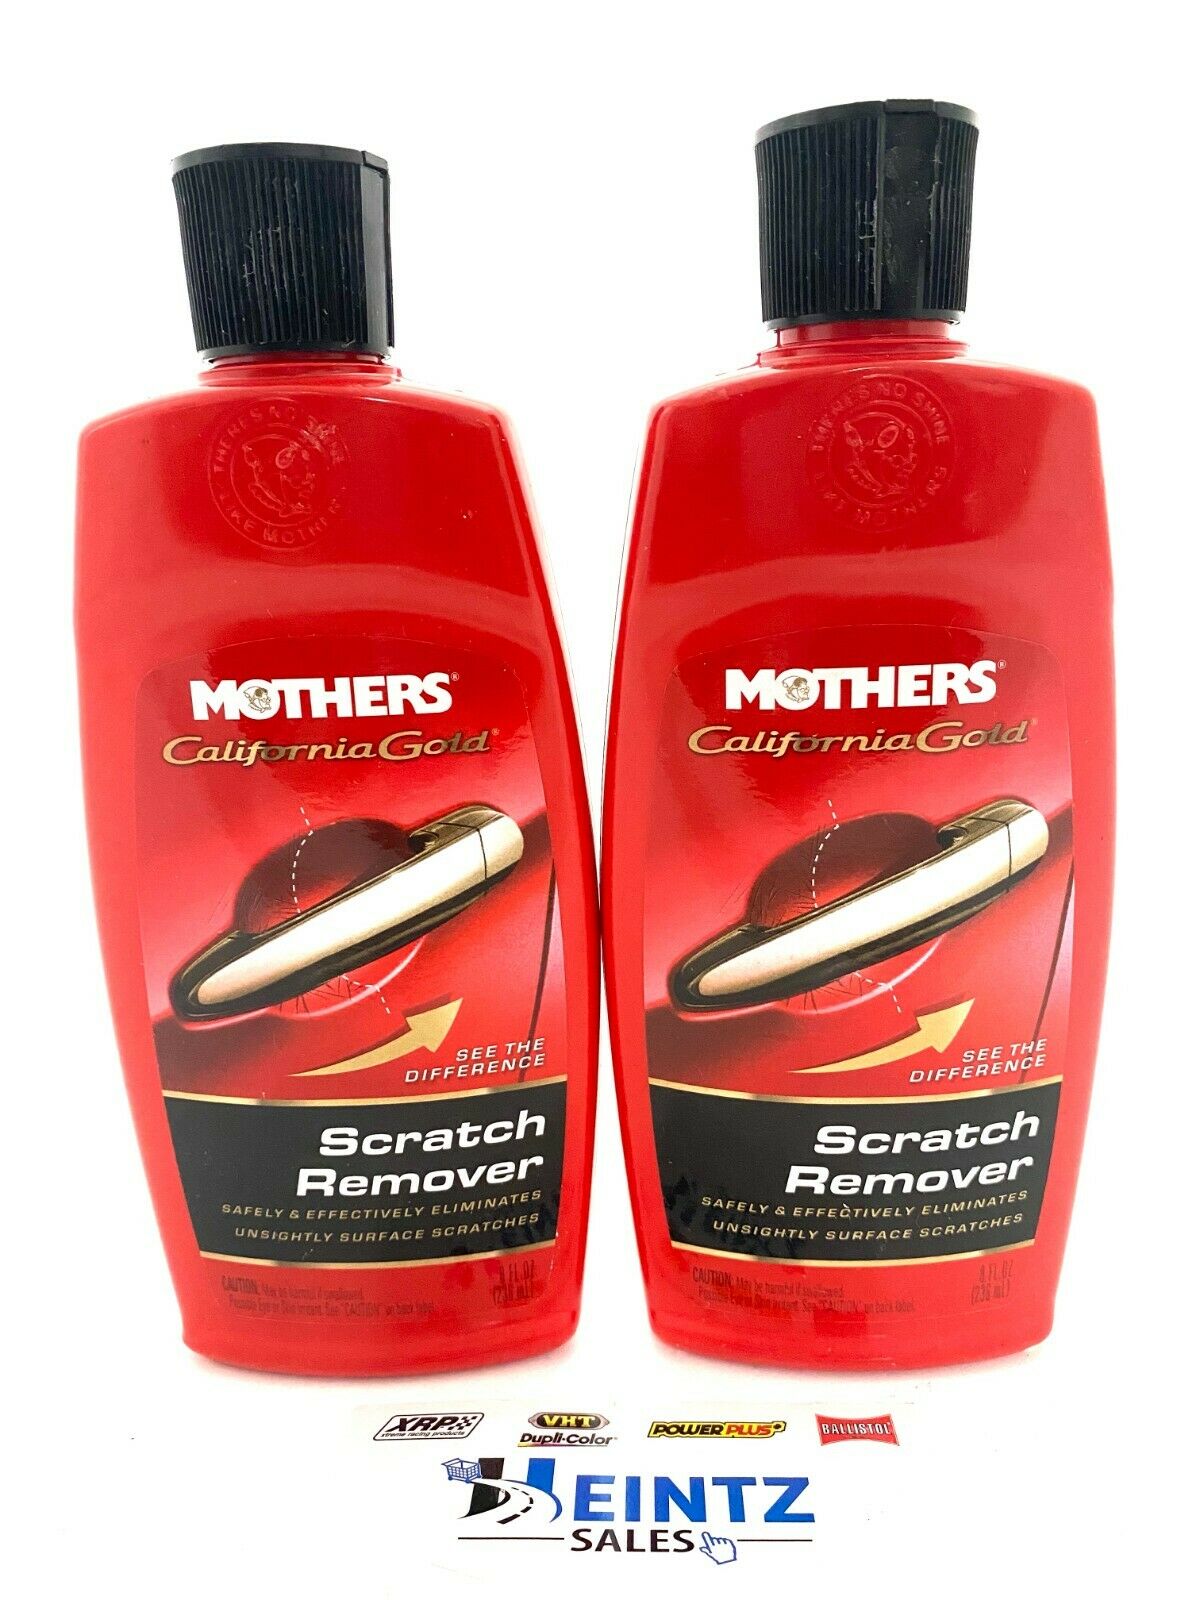 MOTHERS 08408 California Gold Scratch Remover 2 PACK - Eliminates scratches - 8 oz.